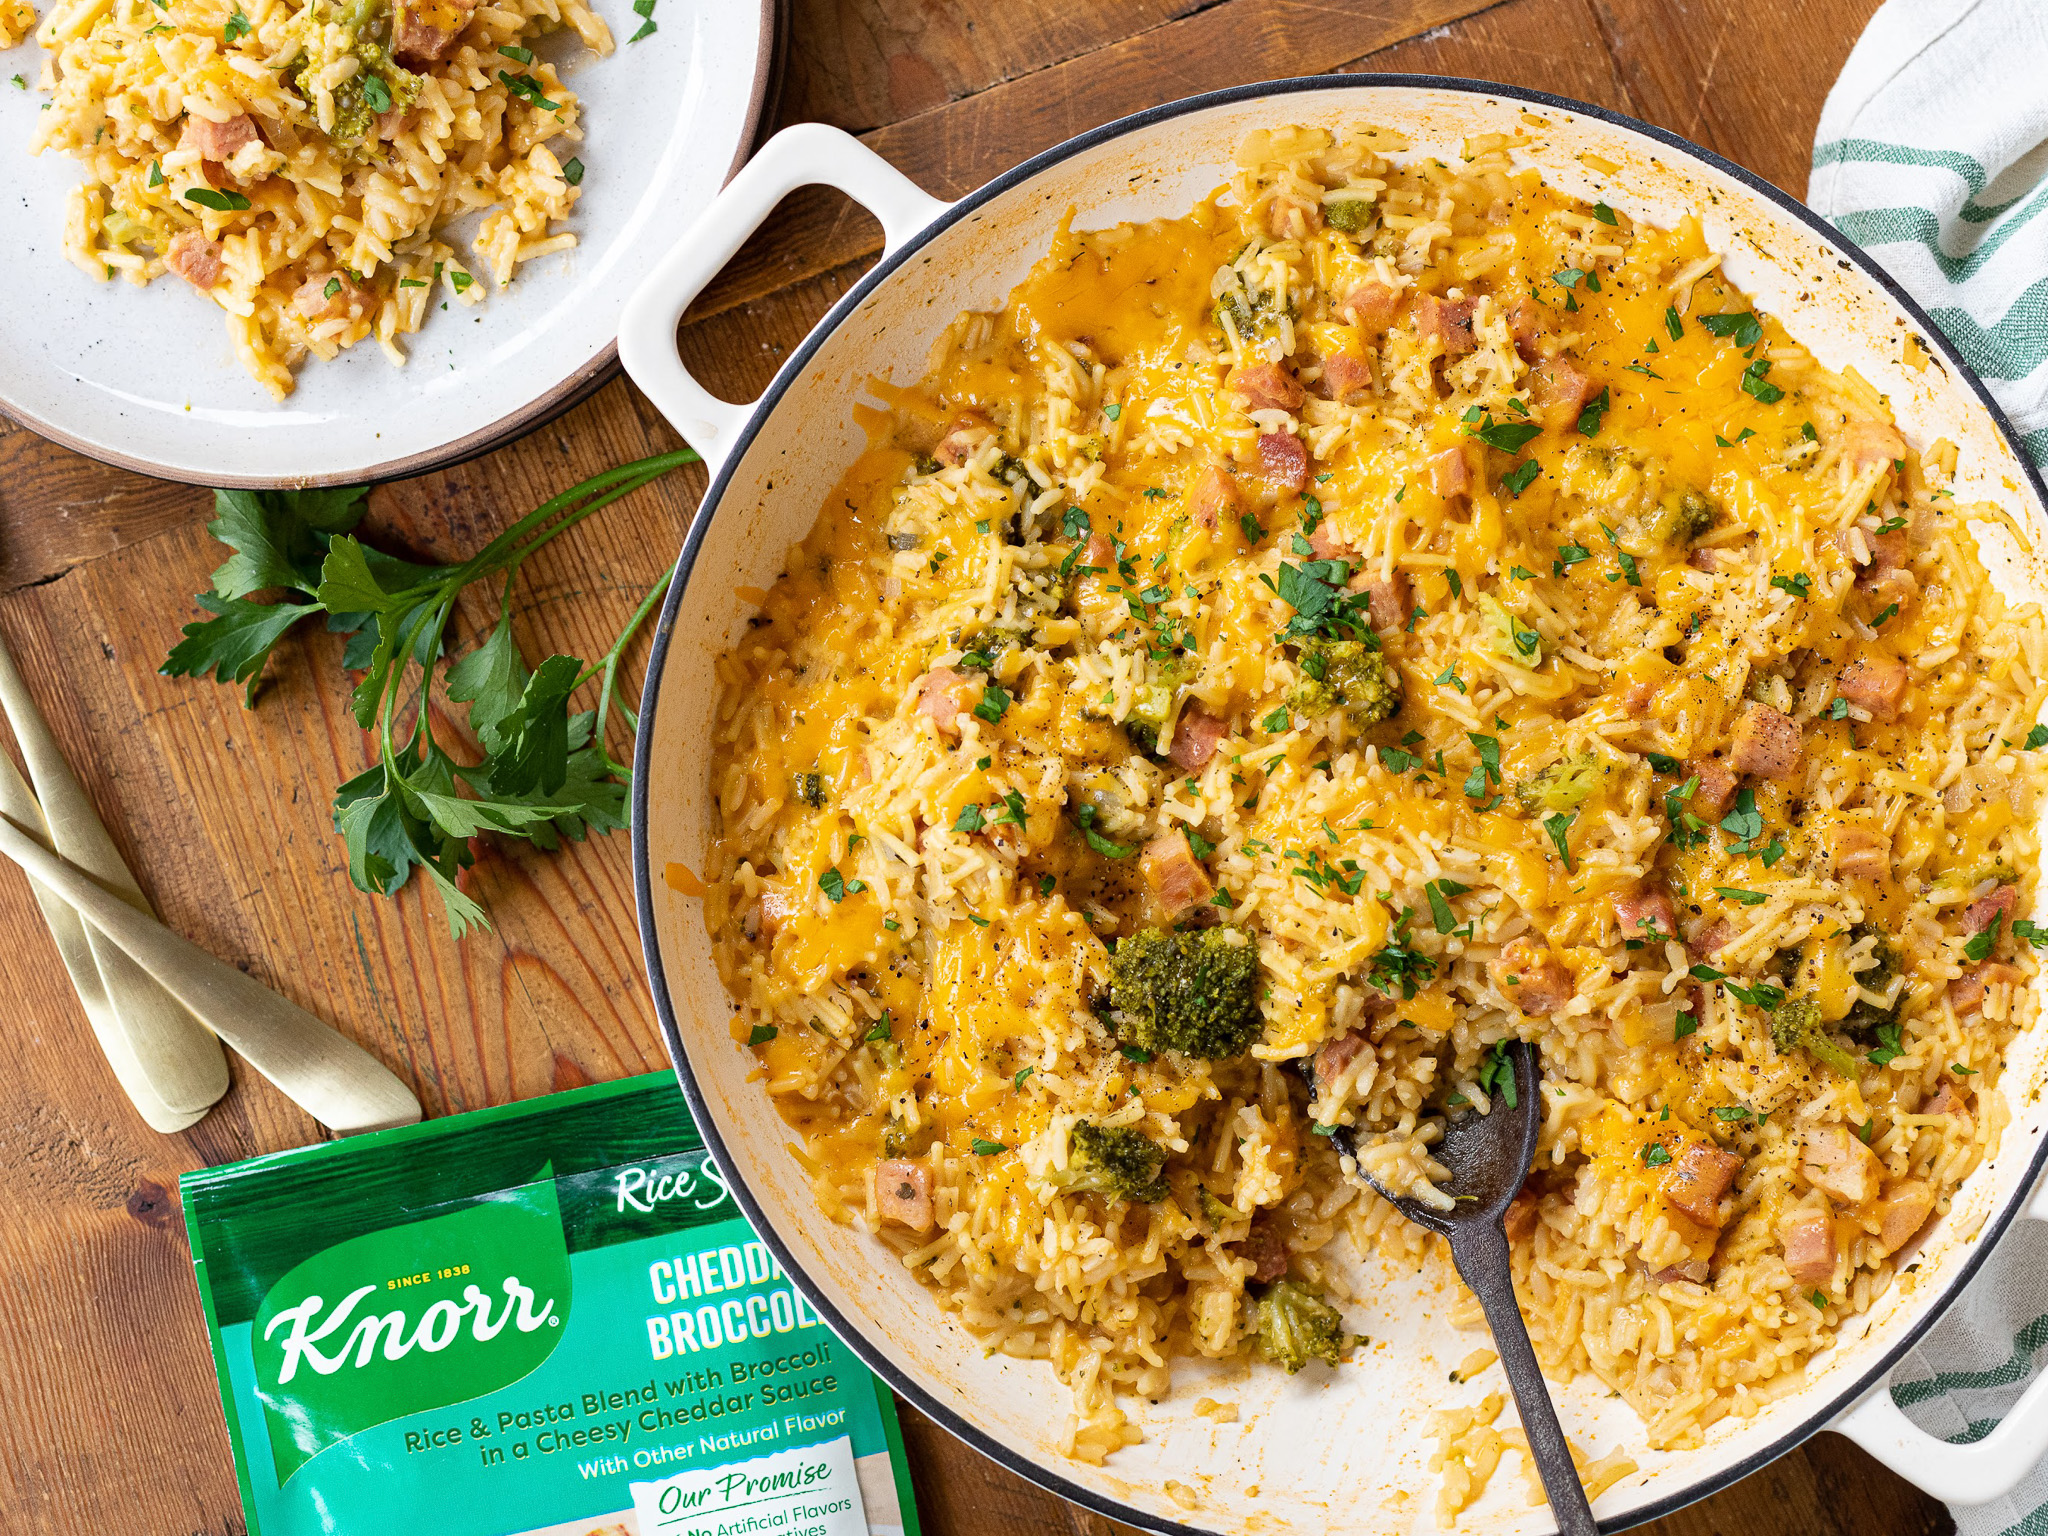 Knorr Sides Are Buy One, Get One FREE At Publix – Perfect For My Cheesy Ham & Rice Skillet